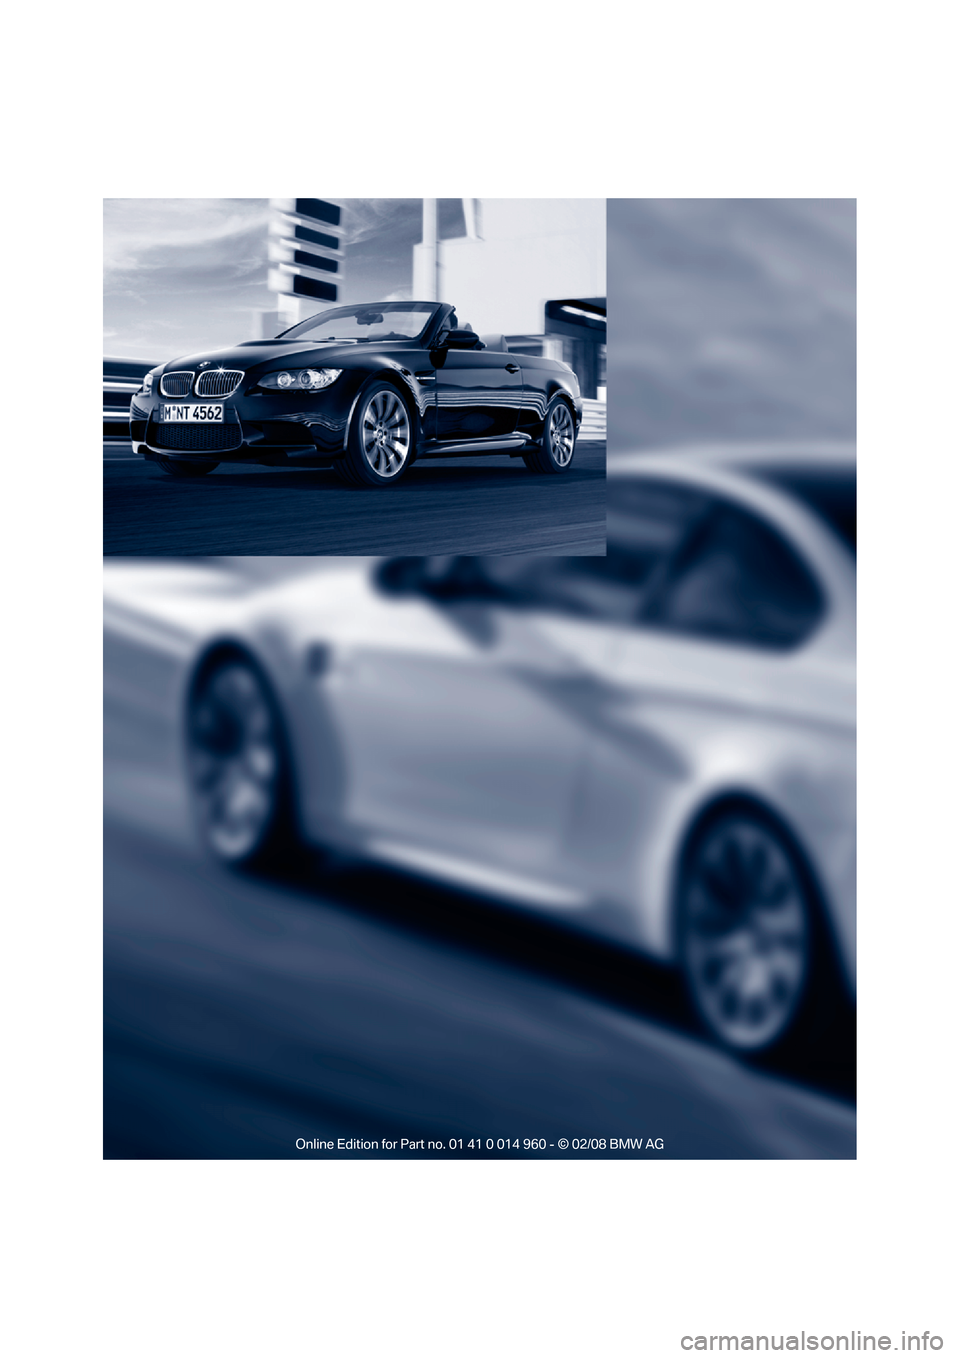 BMW M3 CONVERTIBLE 2008 E93 Owners Manual 